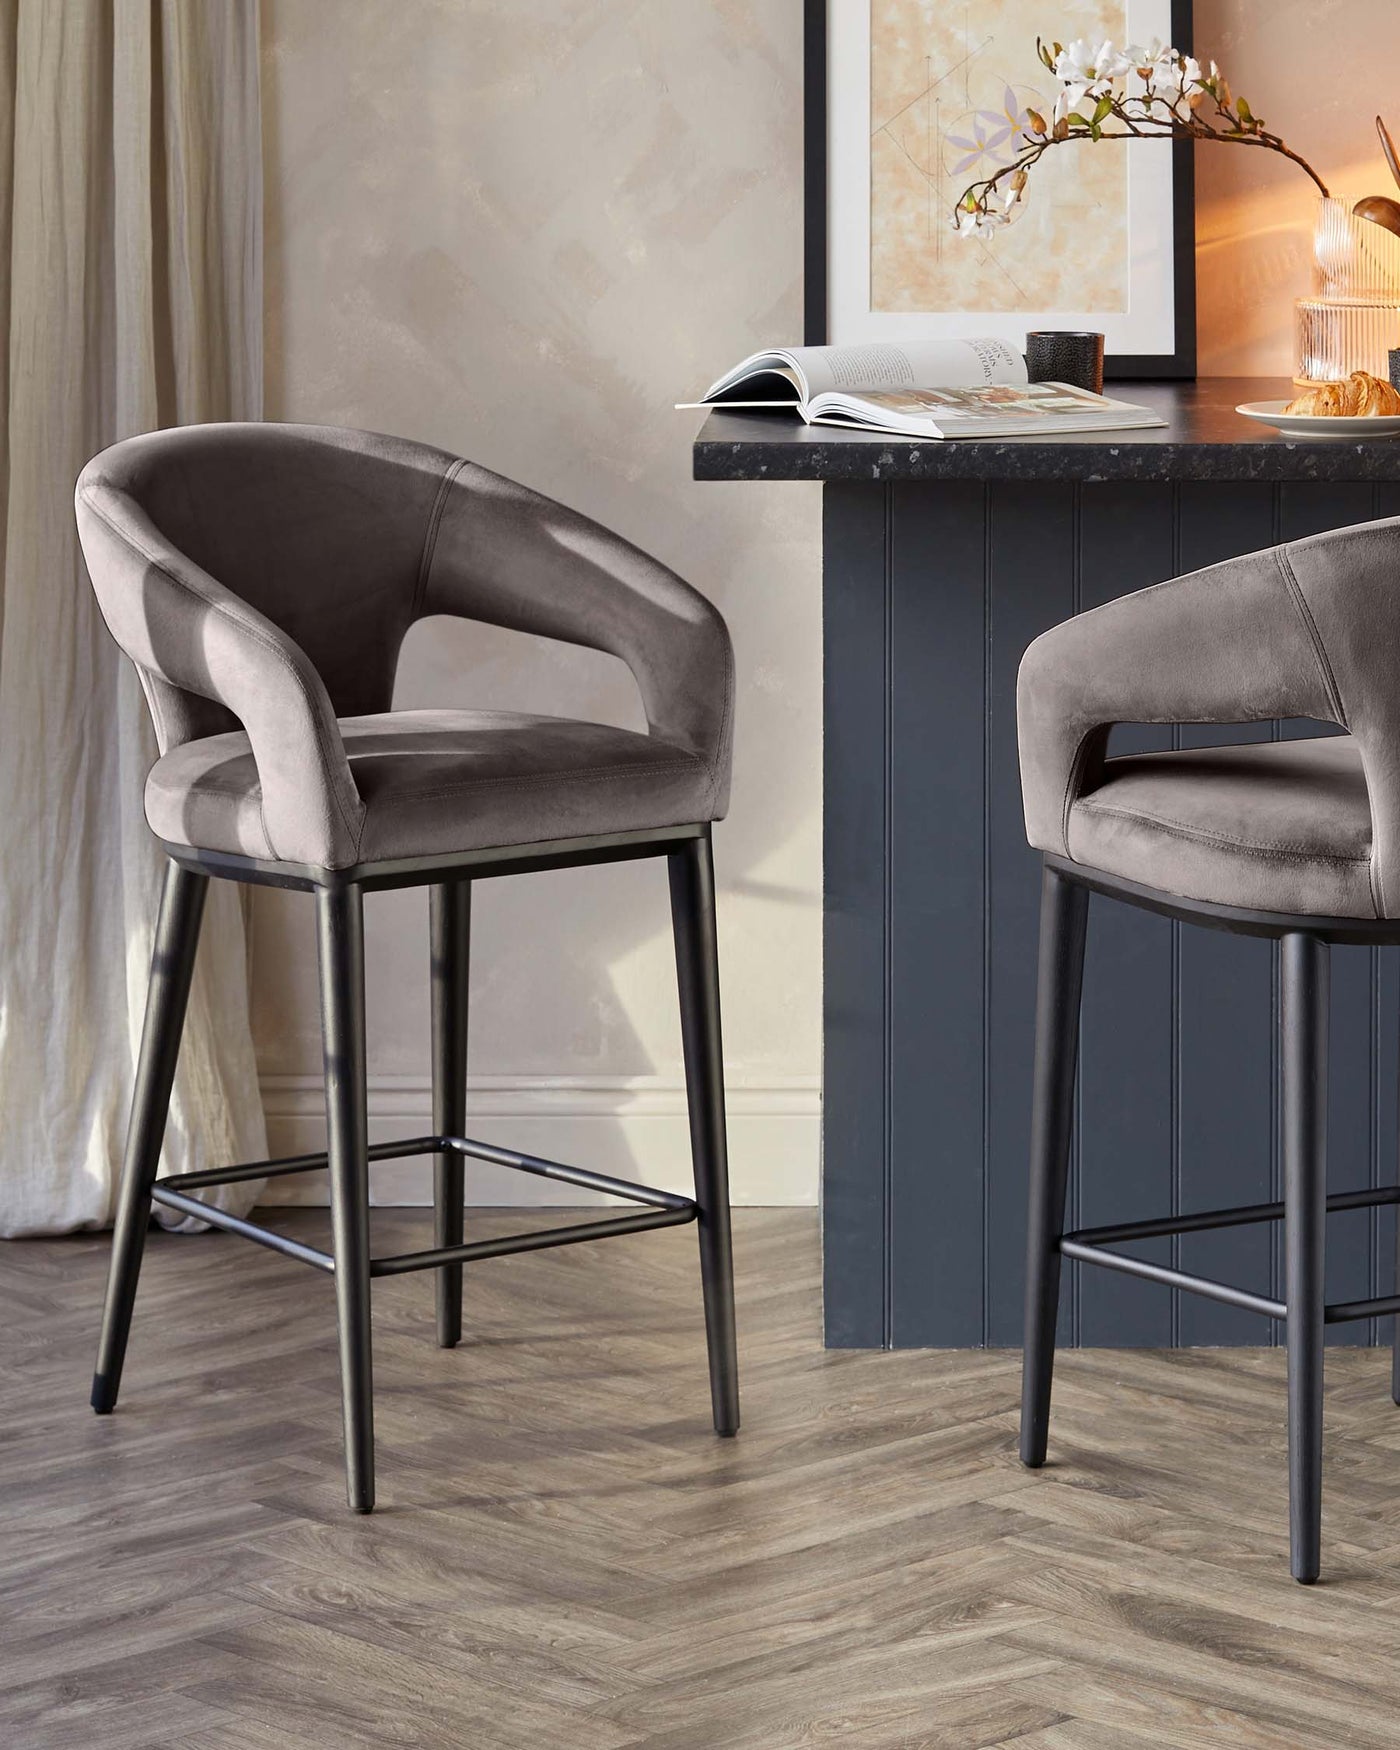 Elegant pair of grey velvet bar chairs with a smooth curved backrest, comfortable armrests, and slender black metal legs with footrests, showcased in a stylish interior setting.